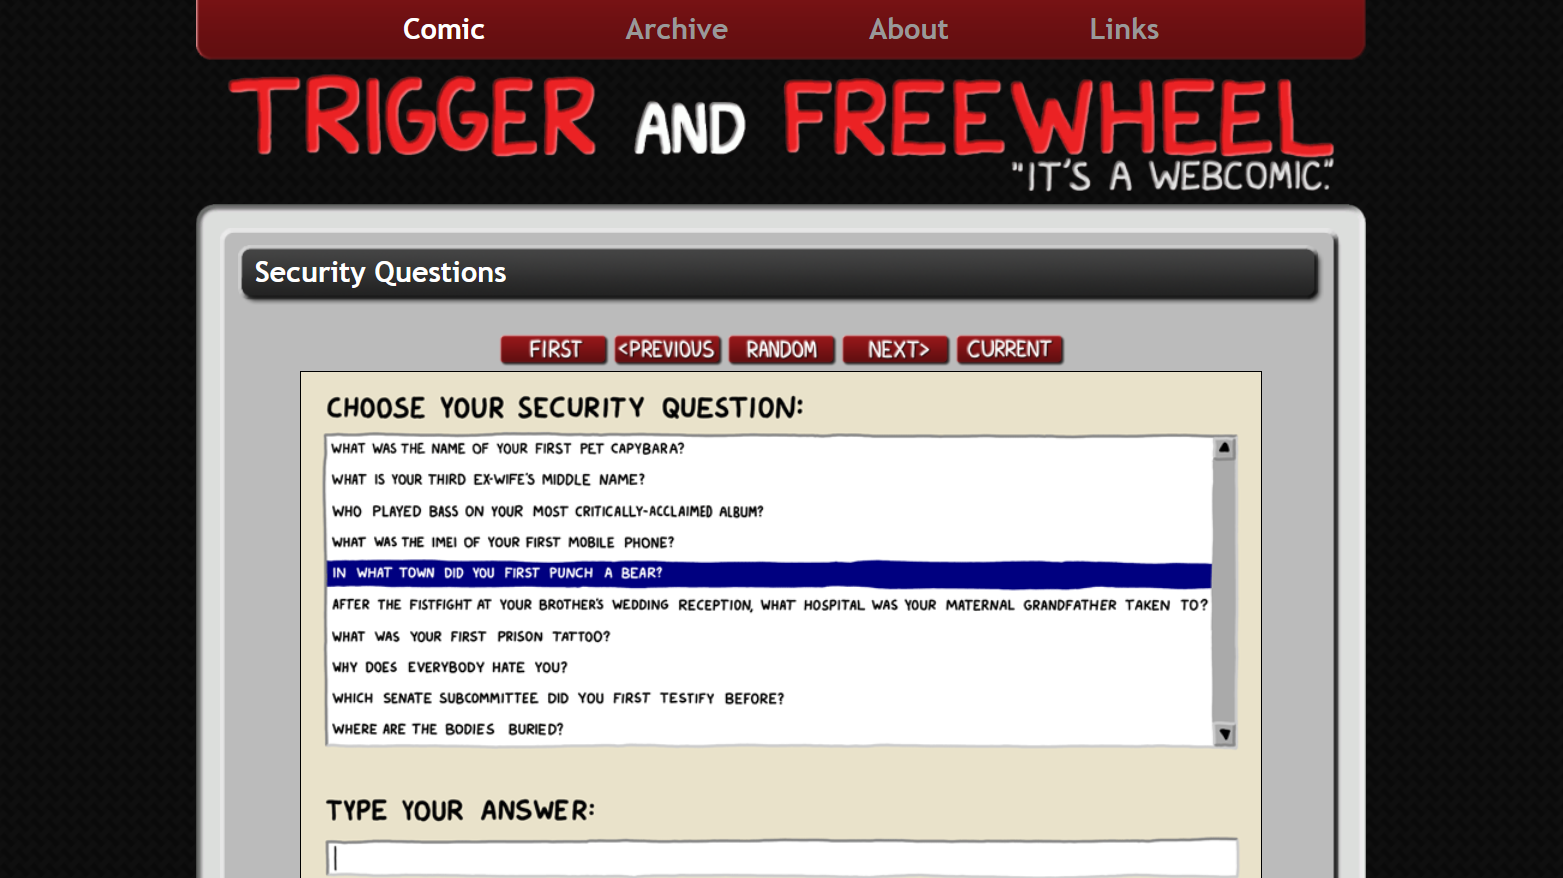 Trigger and Freewheel, "Security Questions" from November 5, 2012